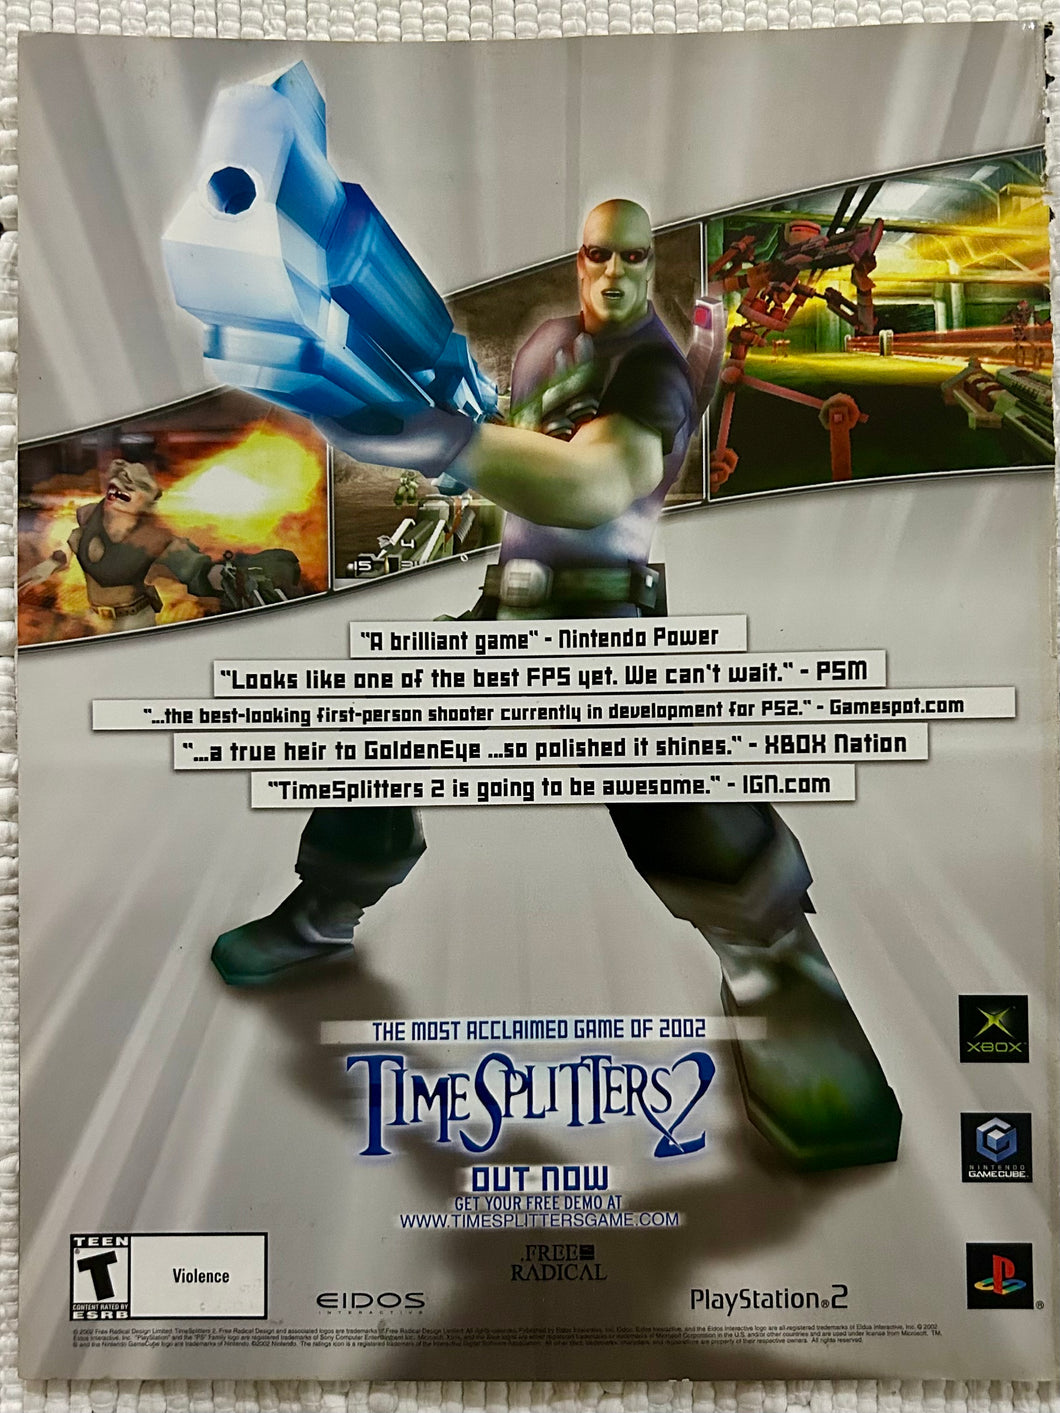 Time Splitters 2 - PS2 NGC Xbox - Original Vintage Advertisement - Print Ads - Laminated A4 Poster